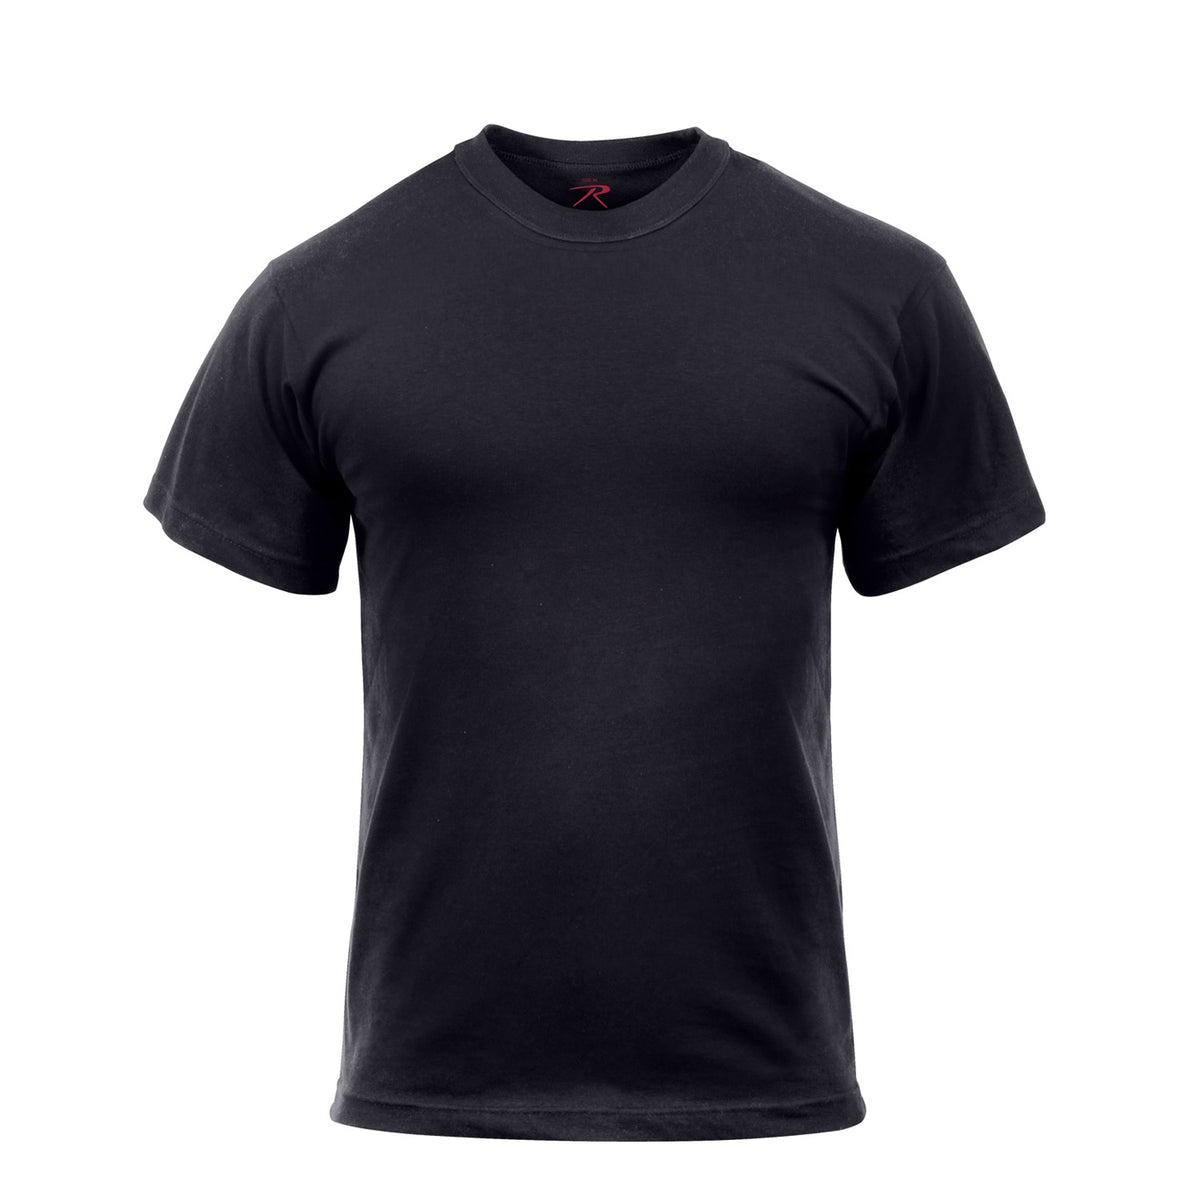 Rothco Solid Color Cotton / Polyester Blend Military T-Shirt Black